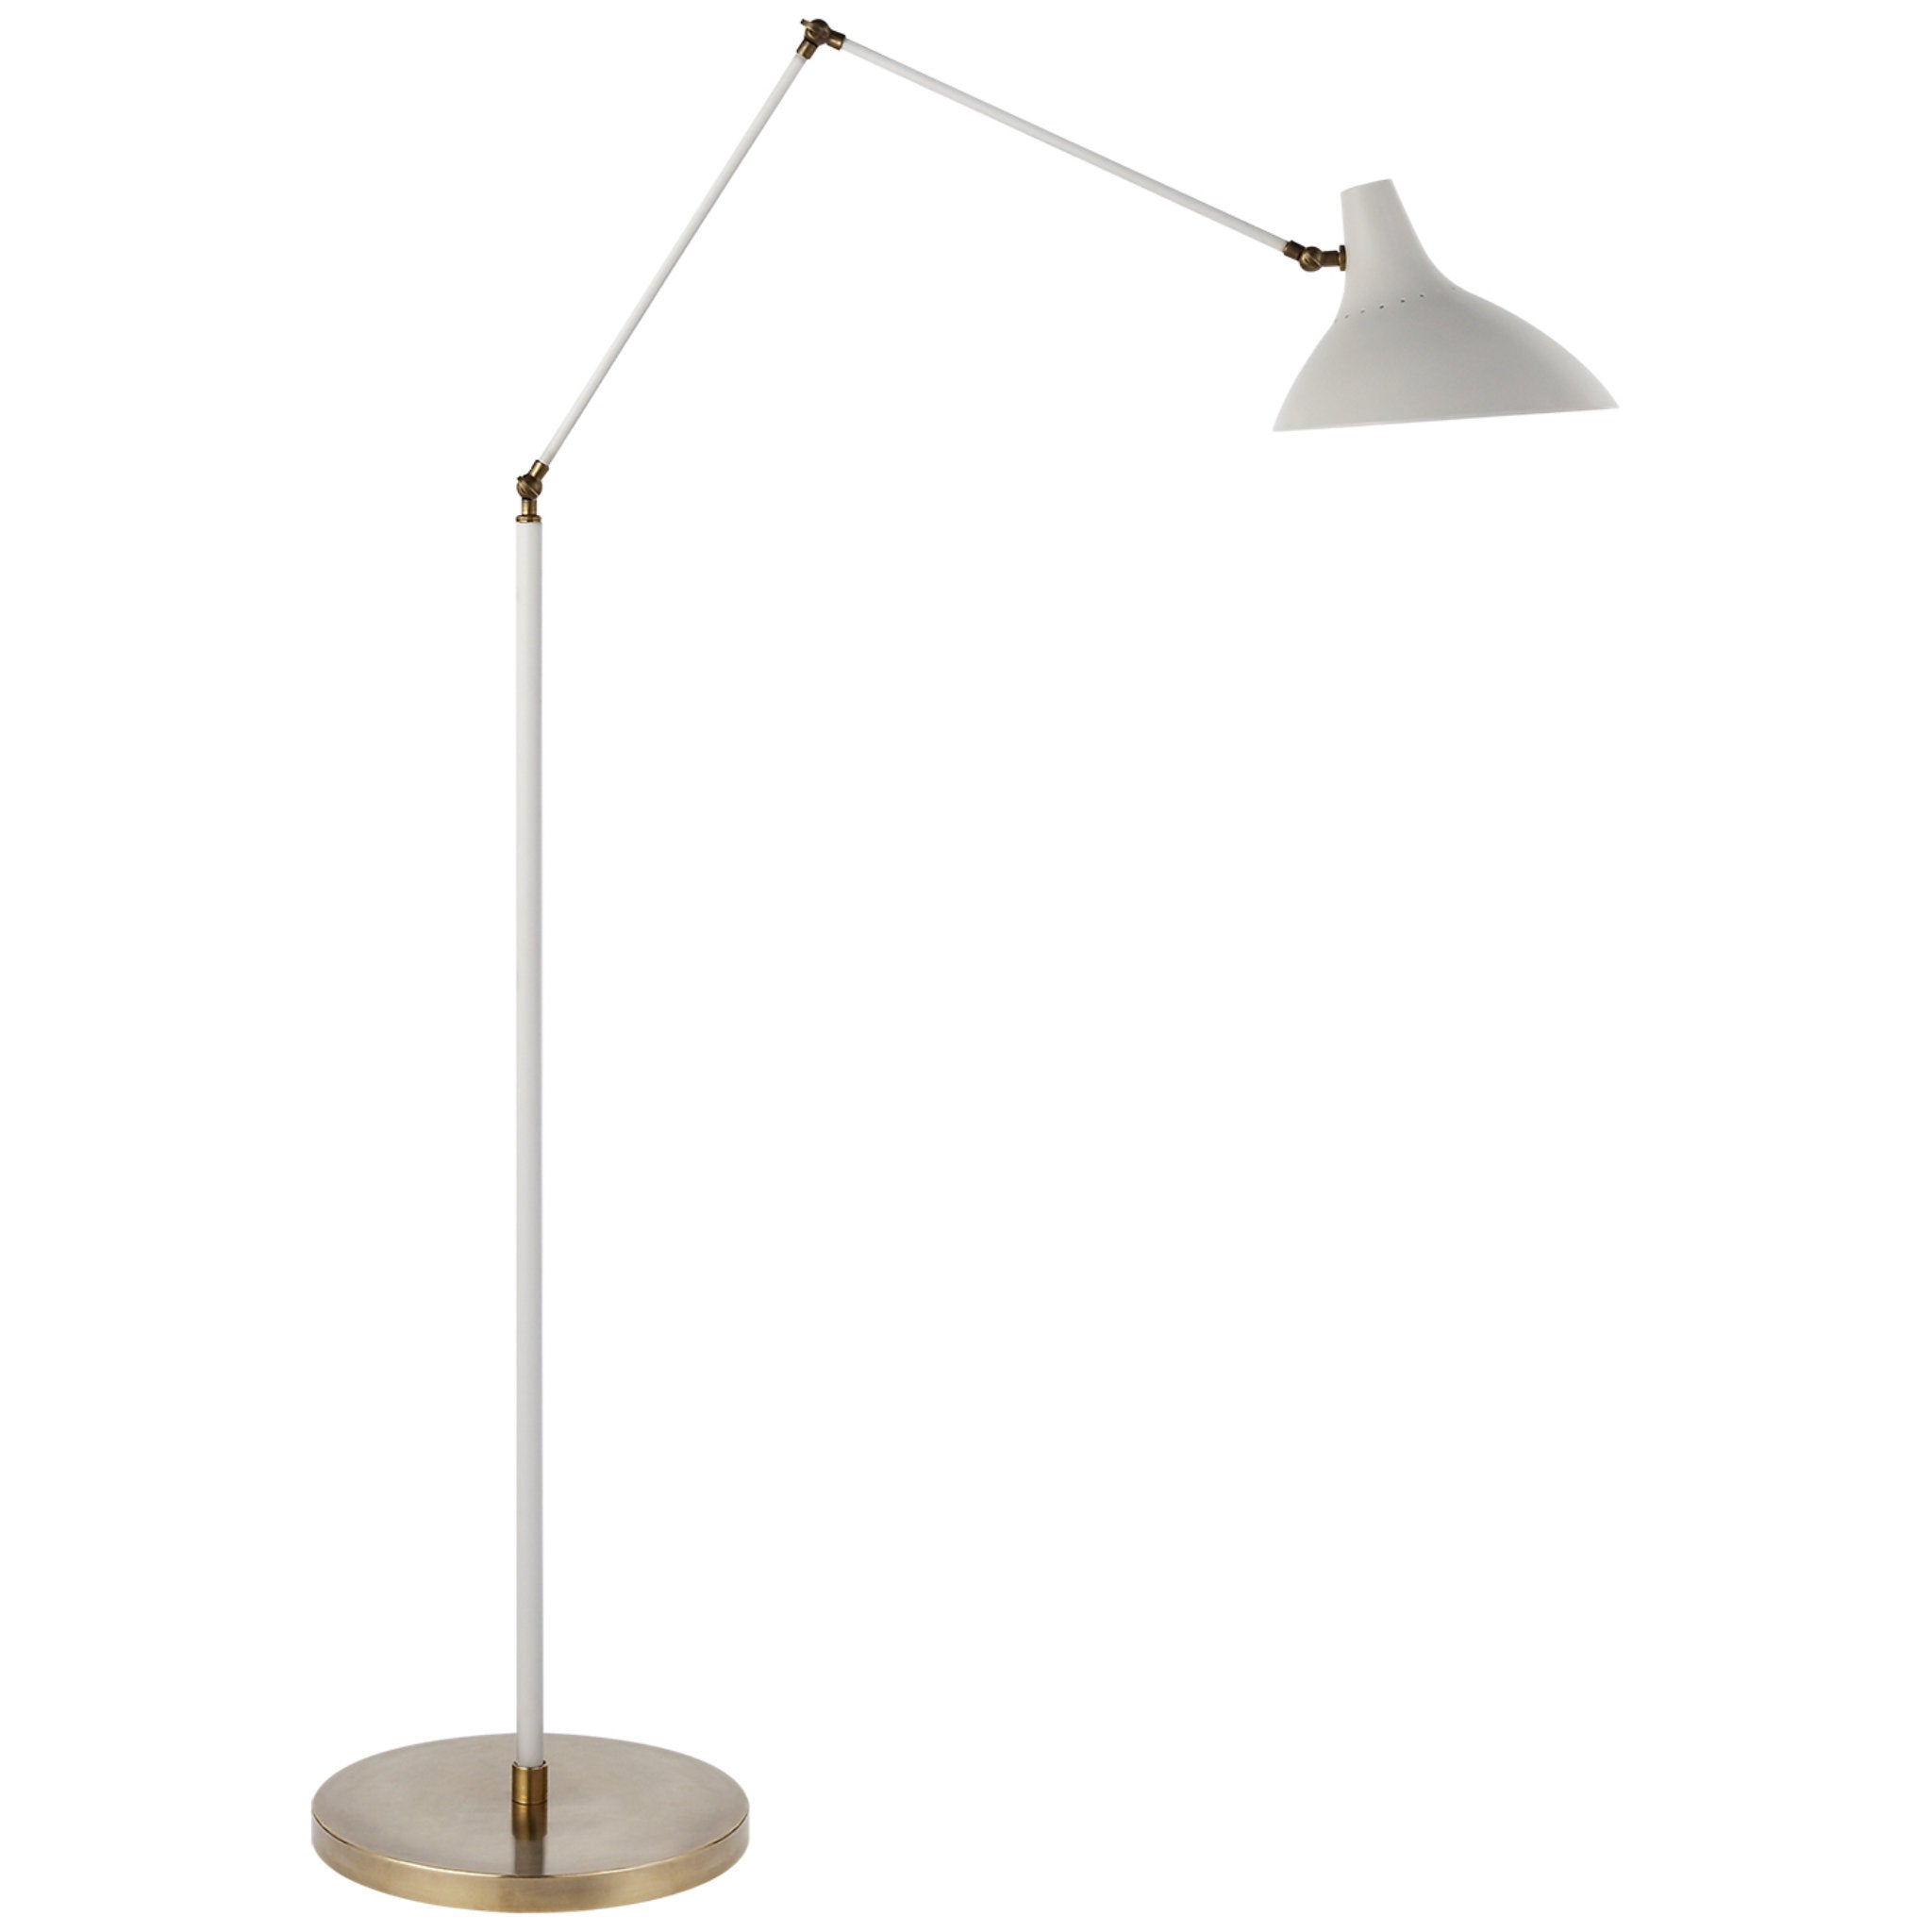 AERIN Charlton Floor Lamp in White and Hand-Rubbed Antique Brass